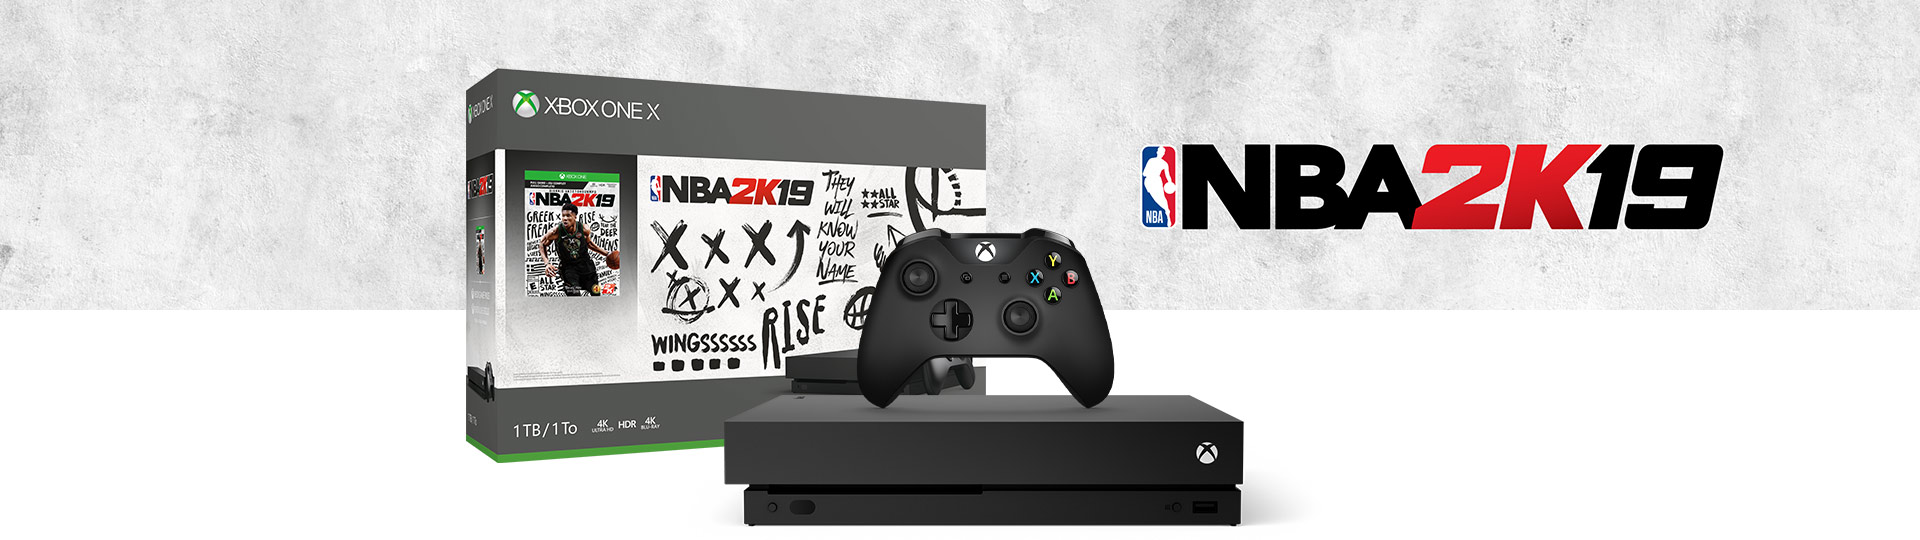 xbox one s 1tb nba 2k19 console and game bundle